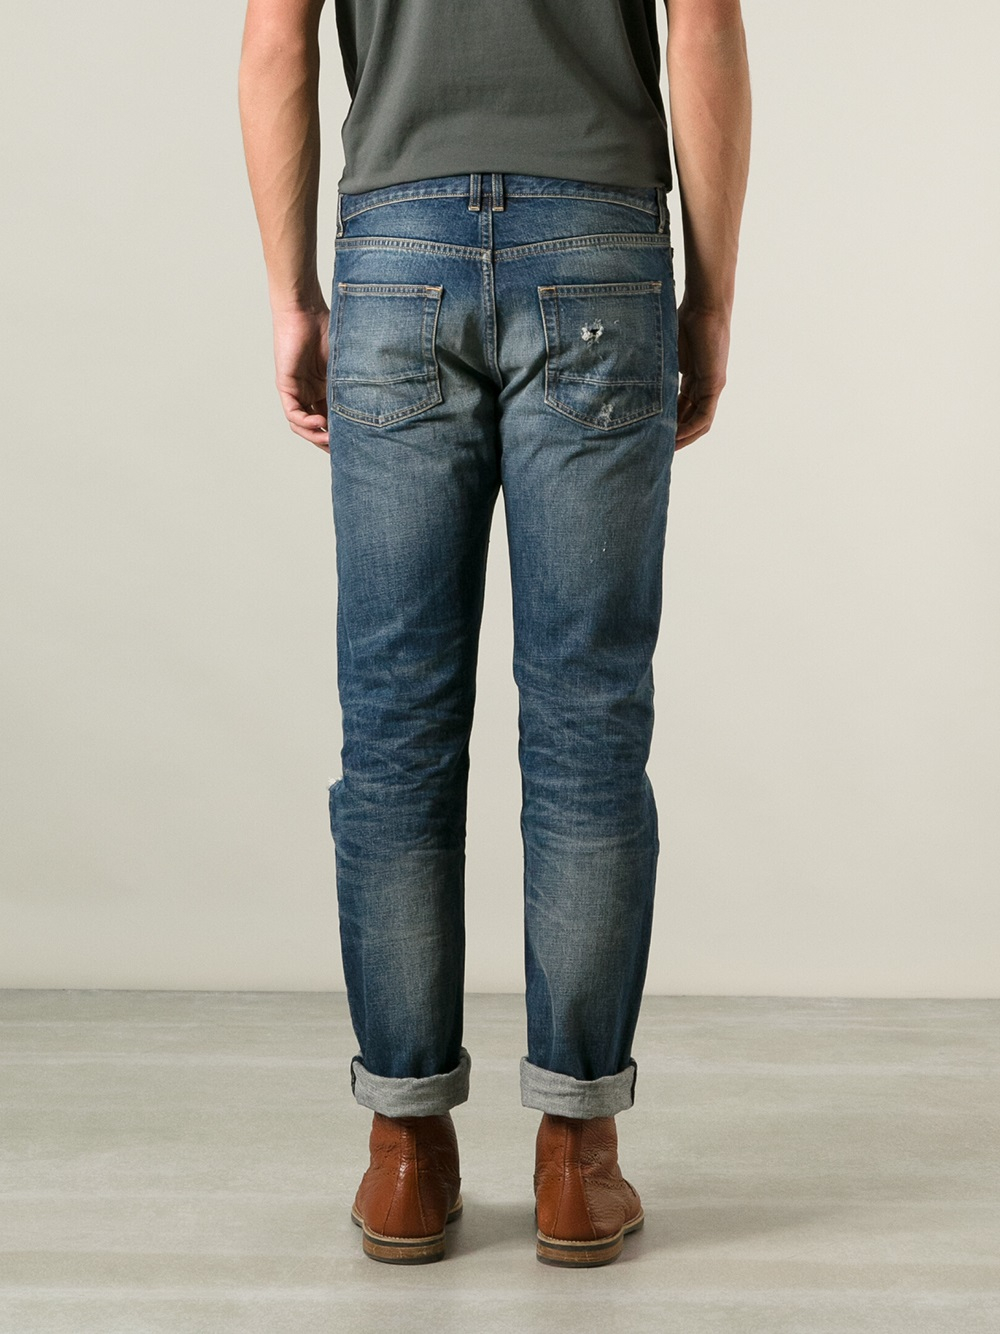 Golden Goose Deluxe Brand Stone Washed Jeans in Blue for Men - Lyst